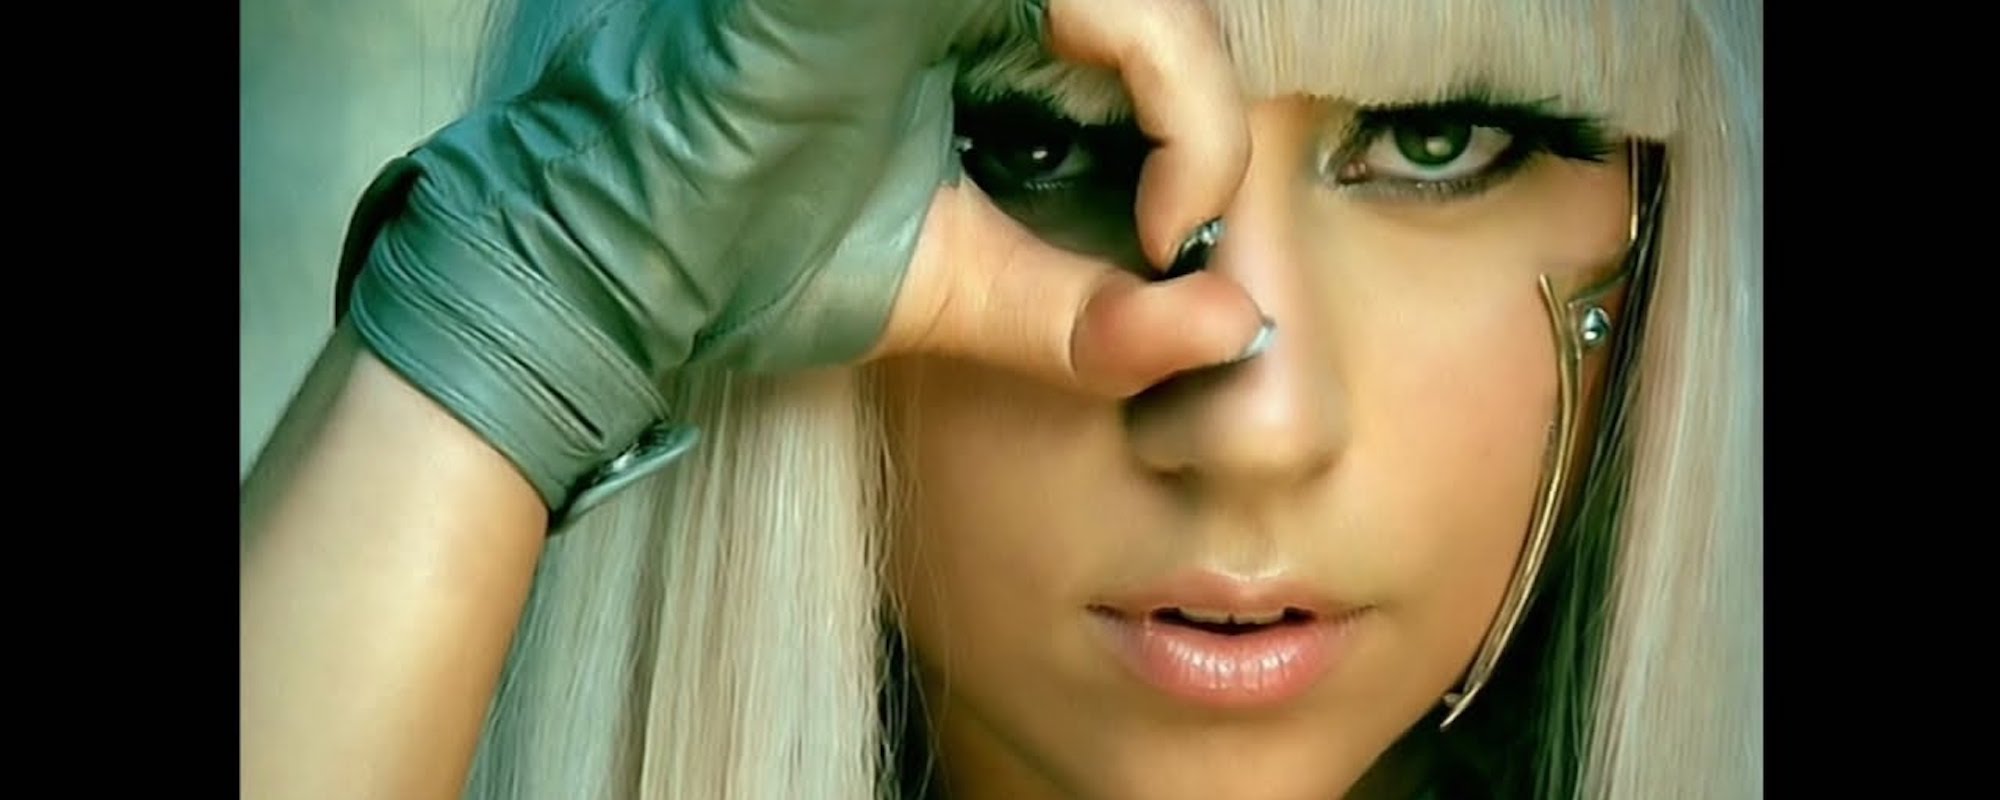 The Sexual Innuendos Behind Lady Gaga’s No. 1 Hit “Poker Face”